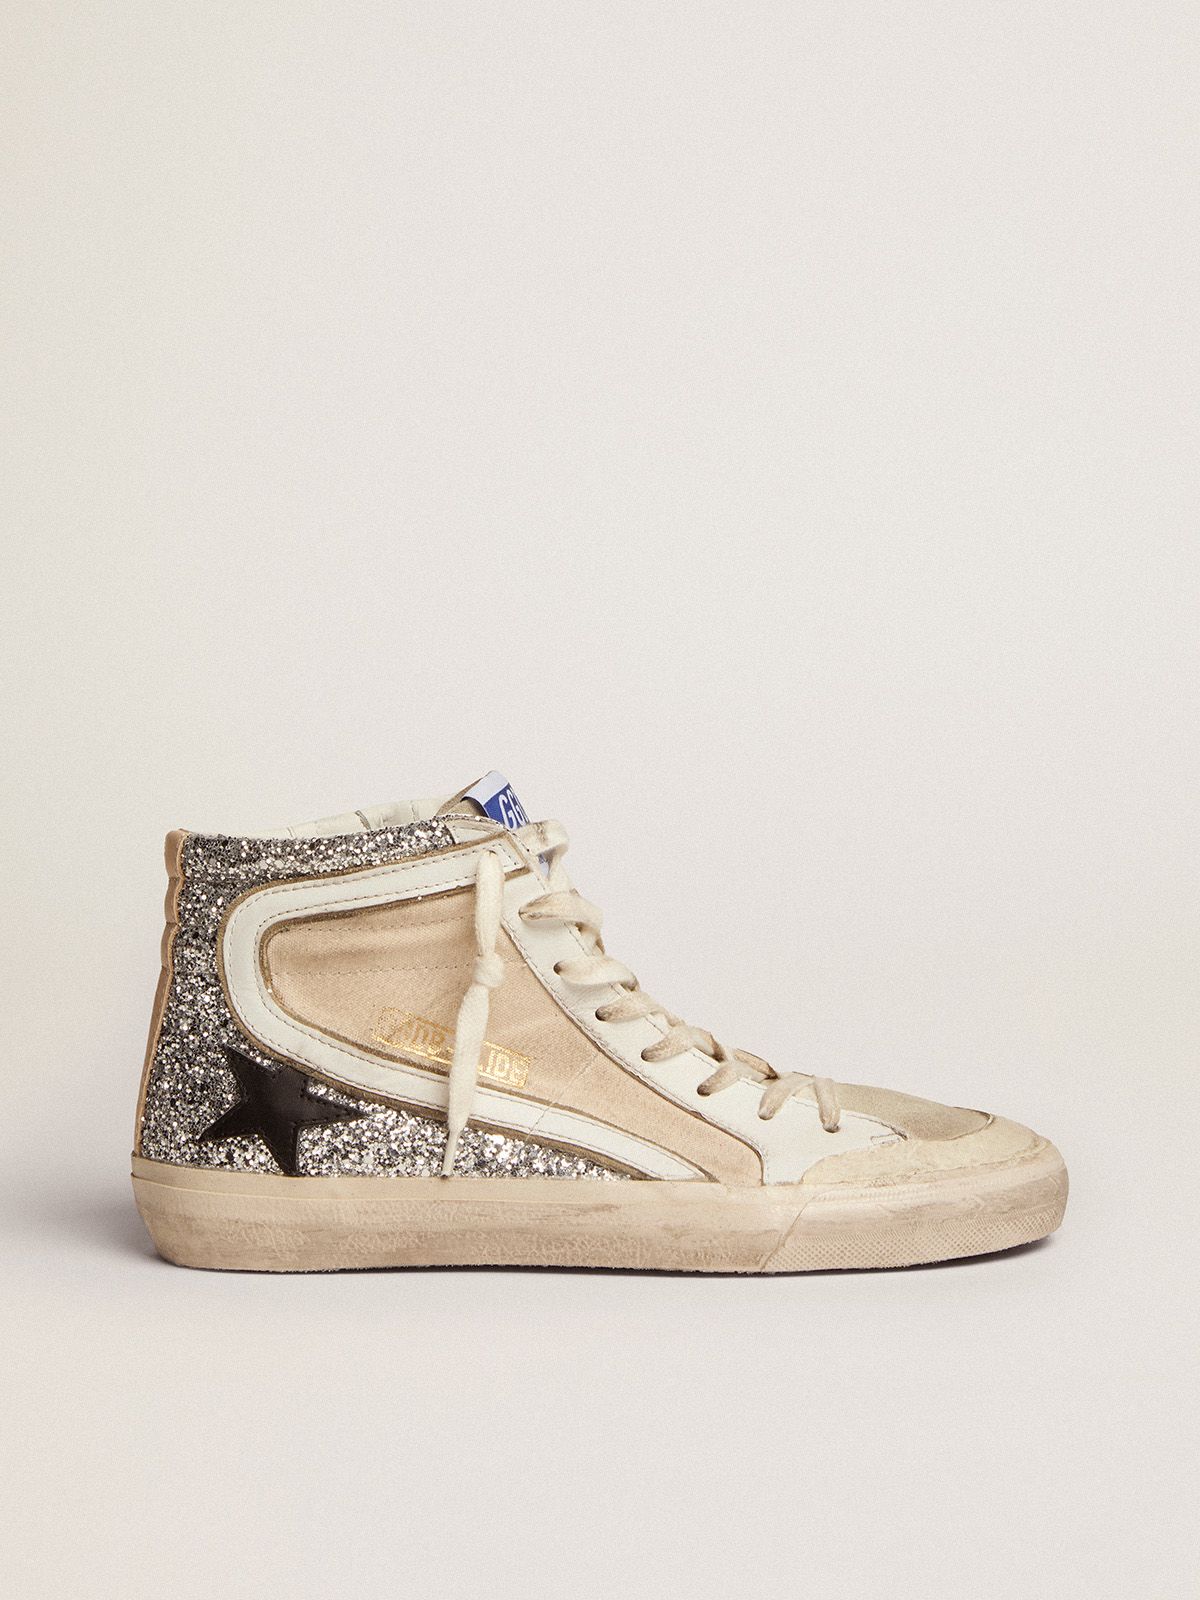 golden goose with silver in sneakers Penstar leather and canvas cream-colored glitter star Slide black